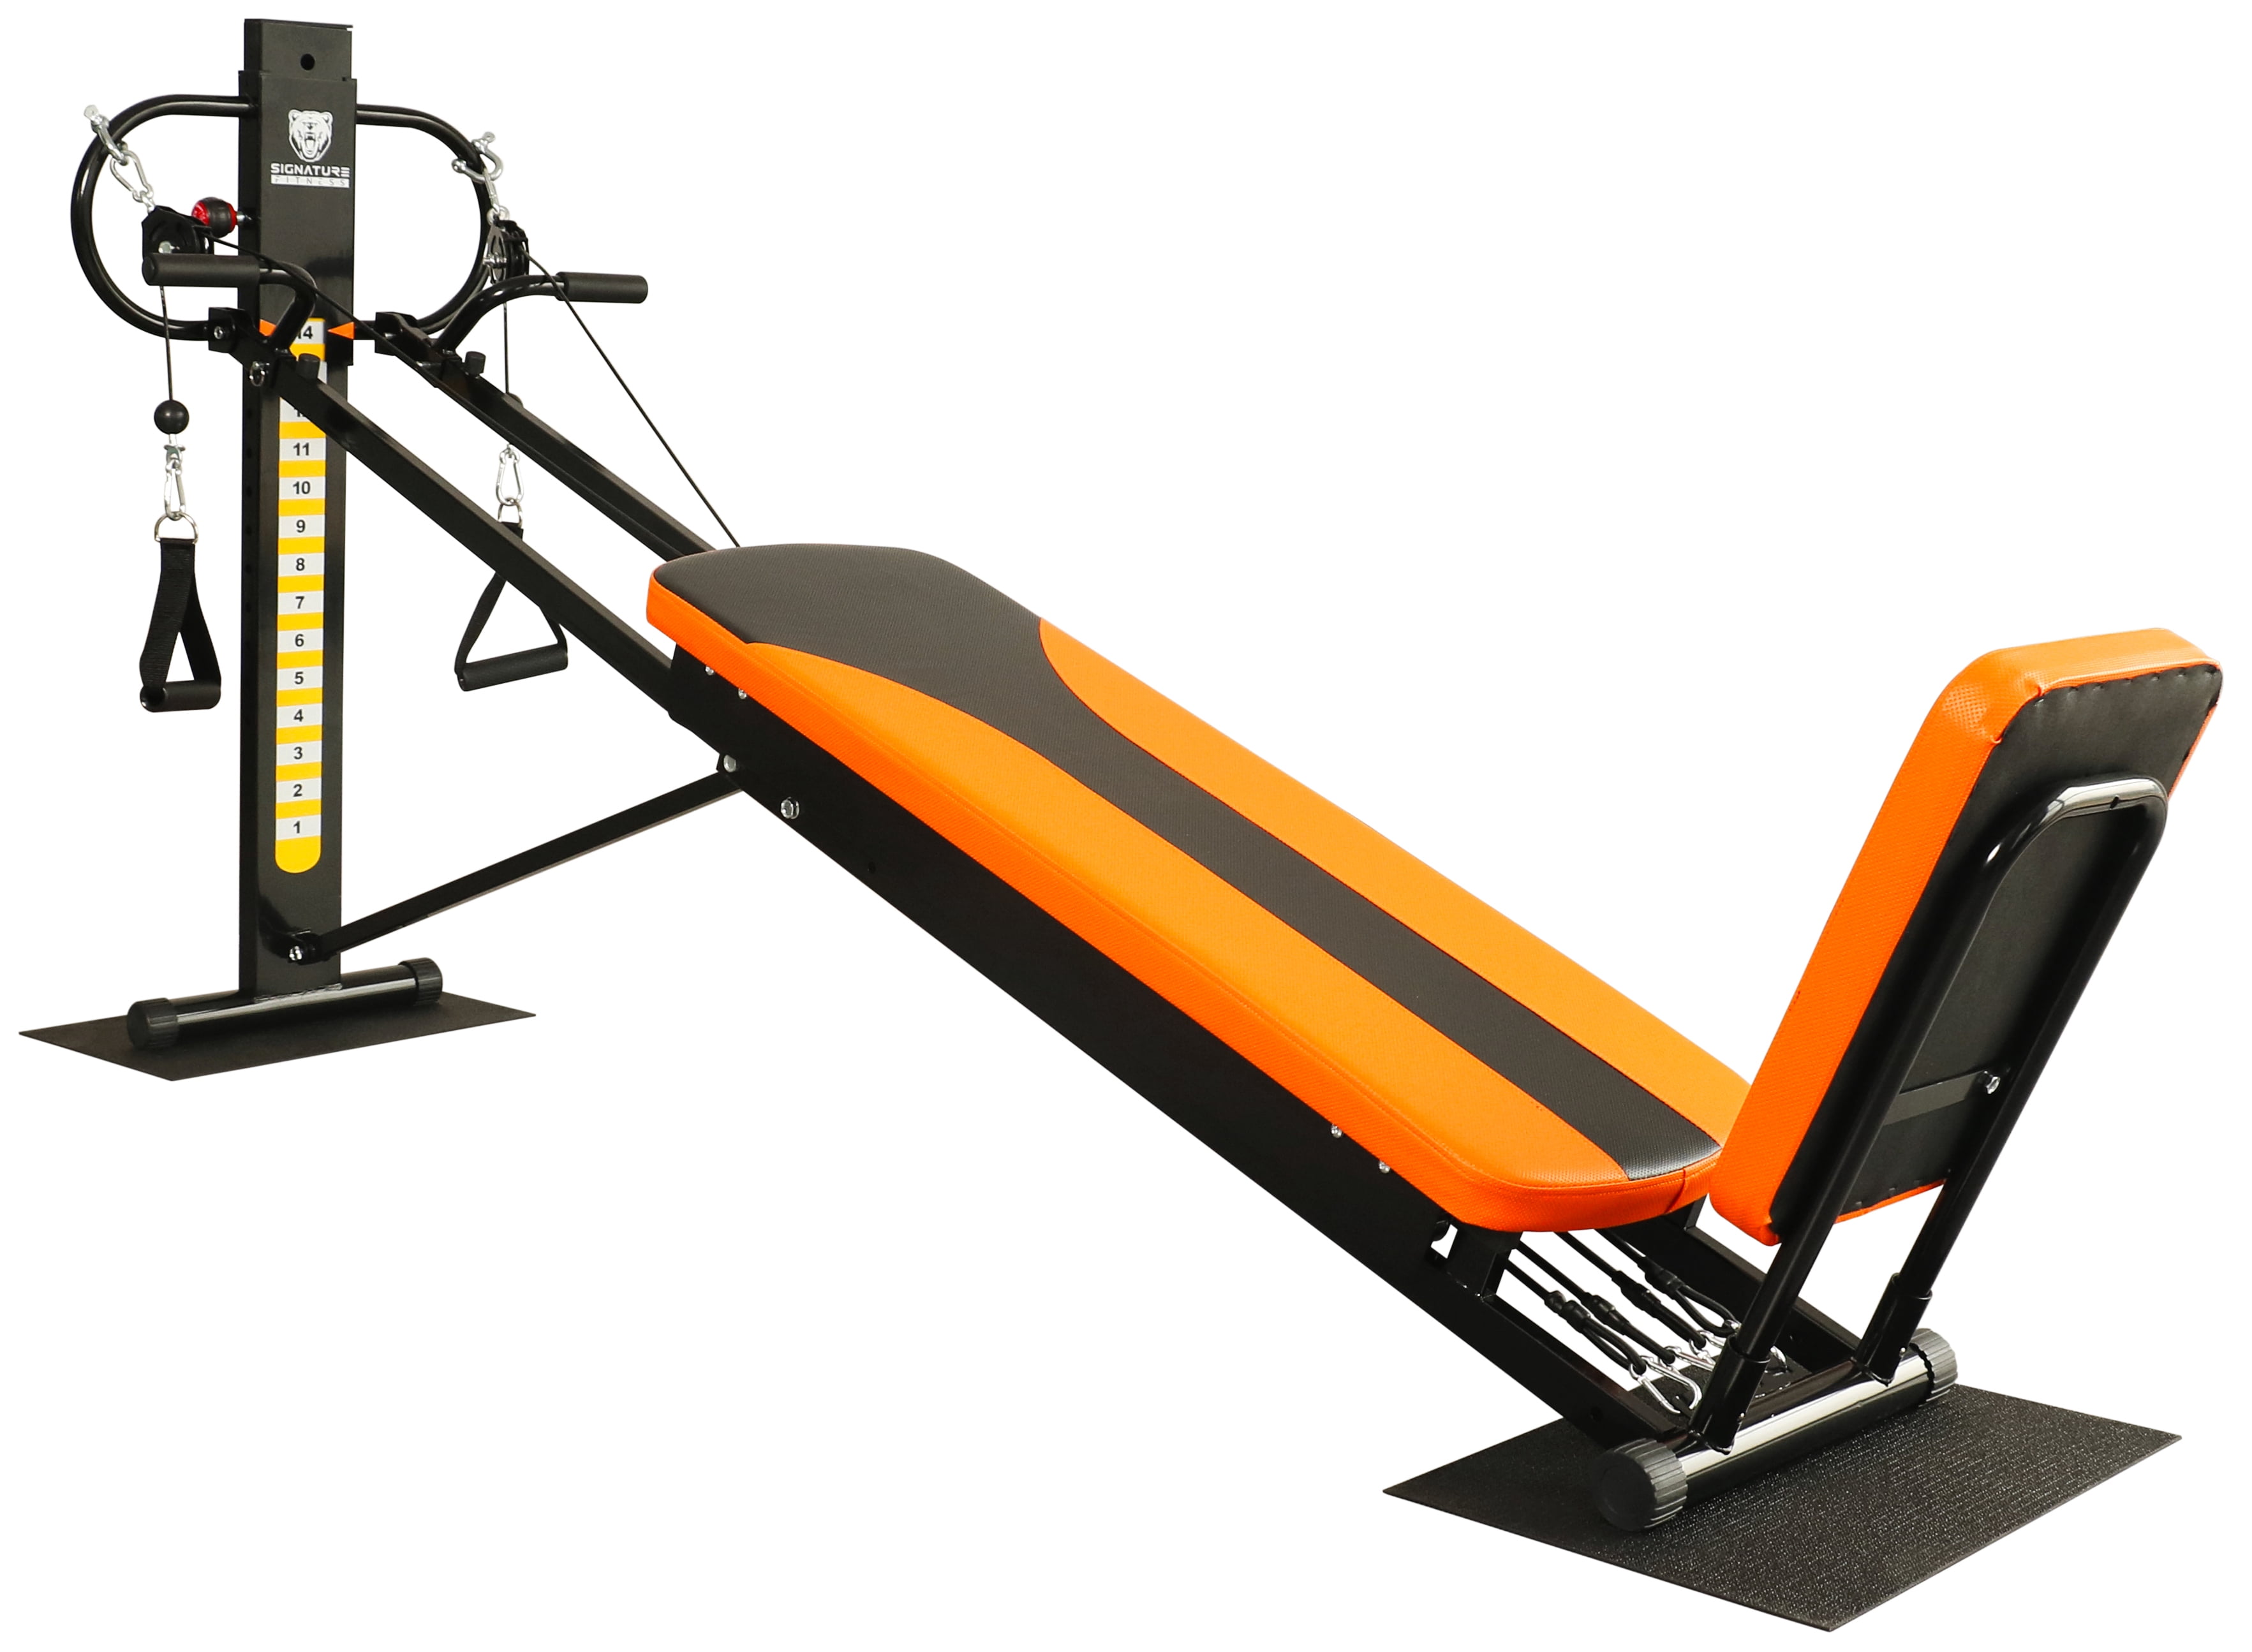 Fitvids LX700 Home Gym System Workout Station with 15 Resistance